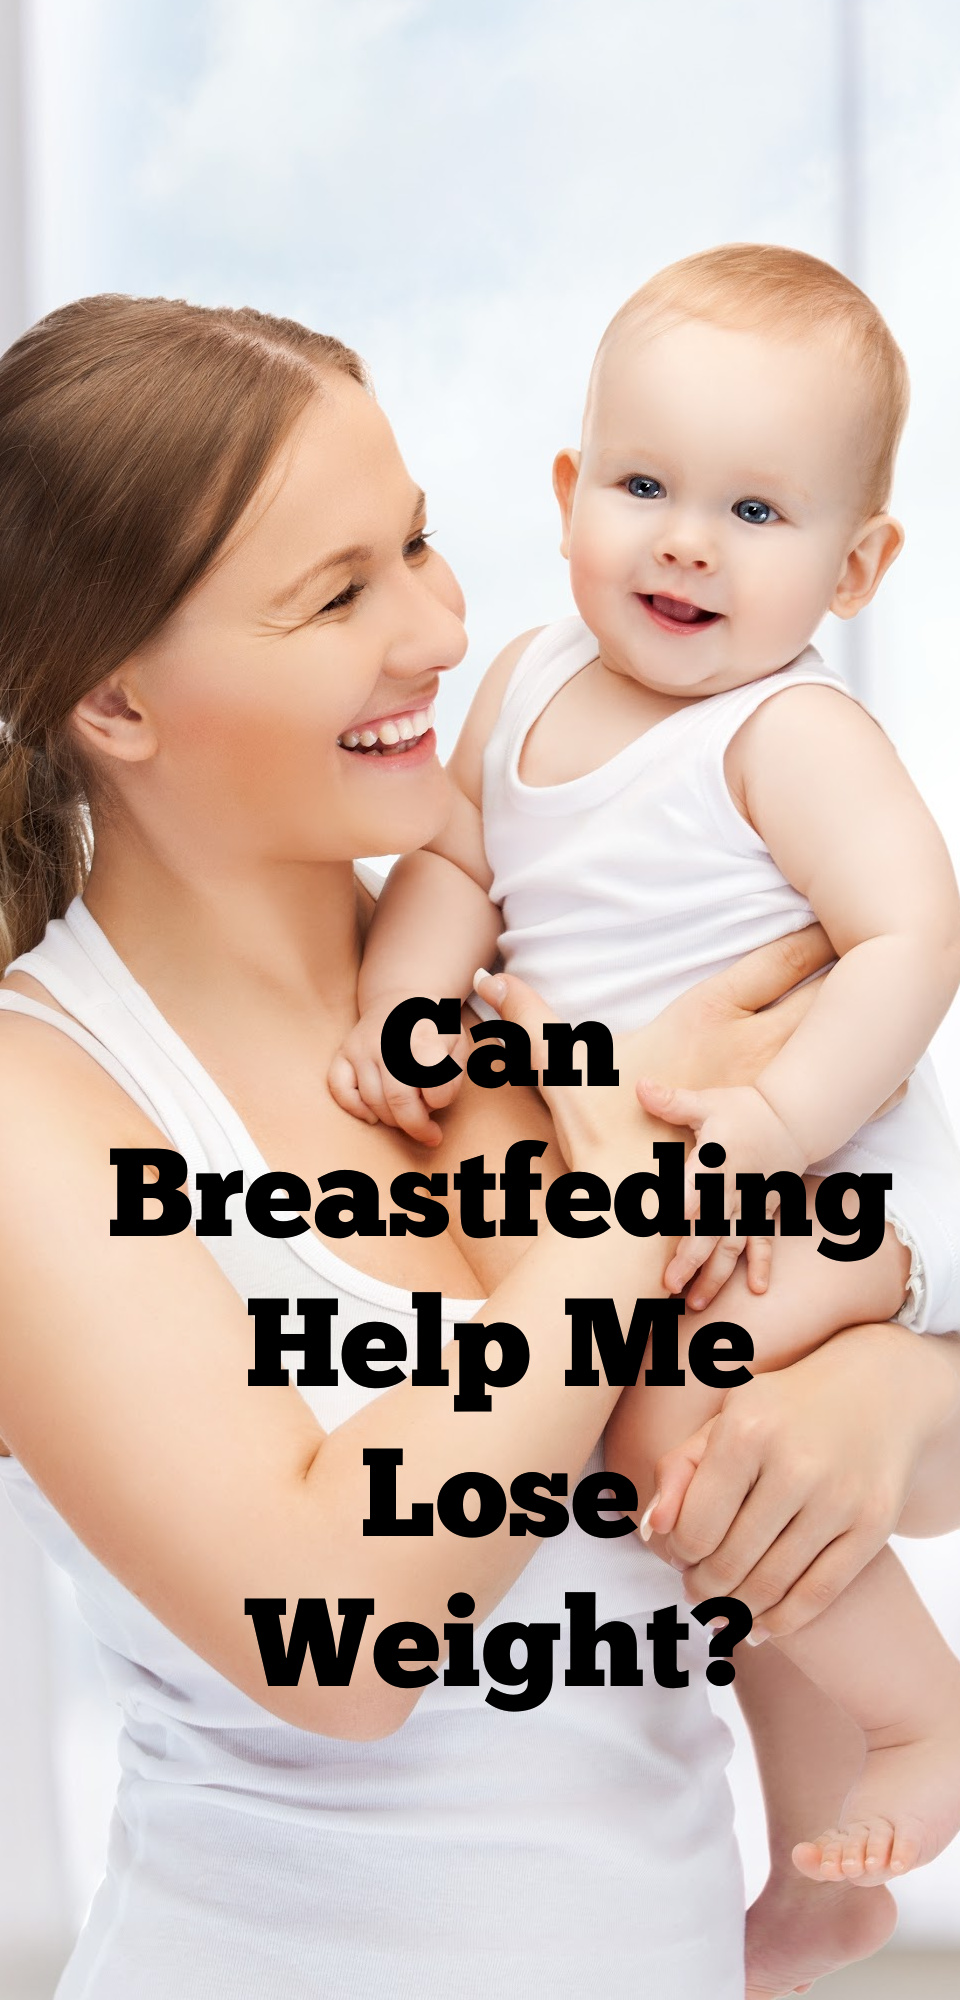 Can Breastfeeding Help Me Lose Weight?